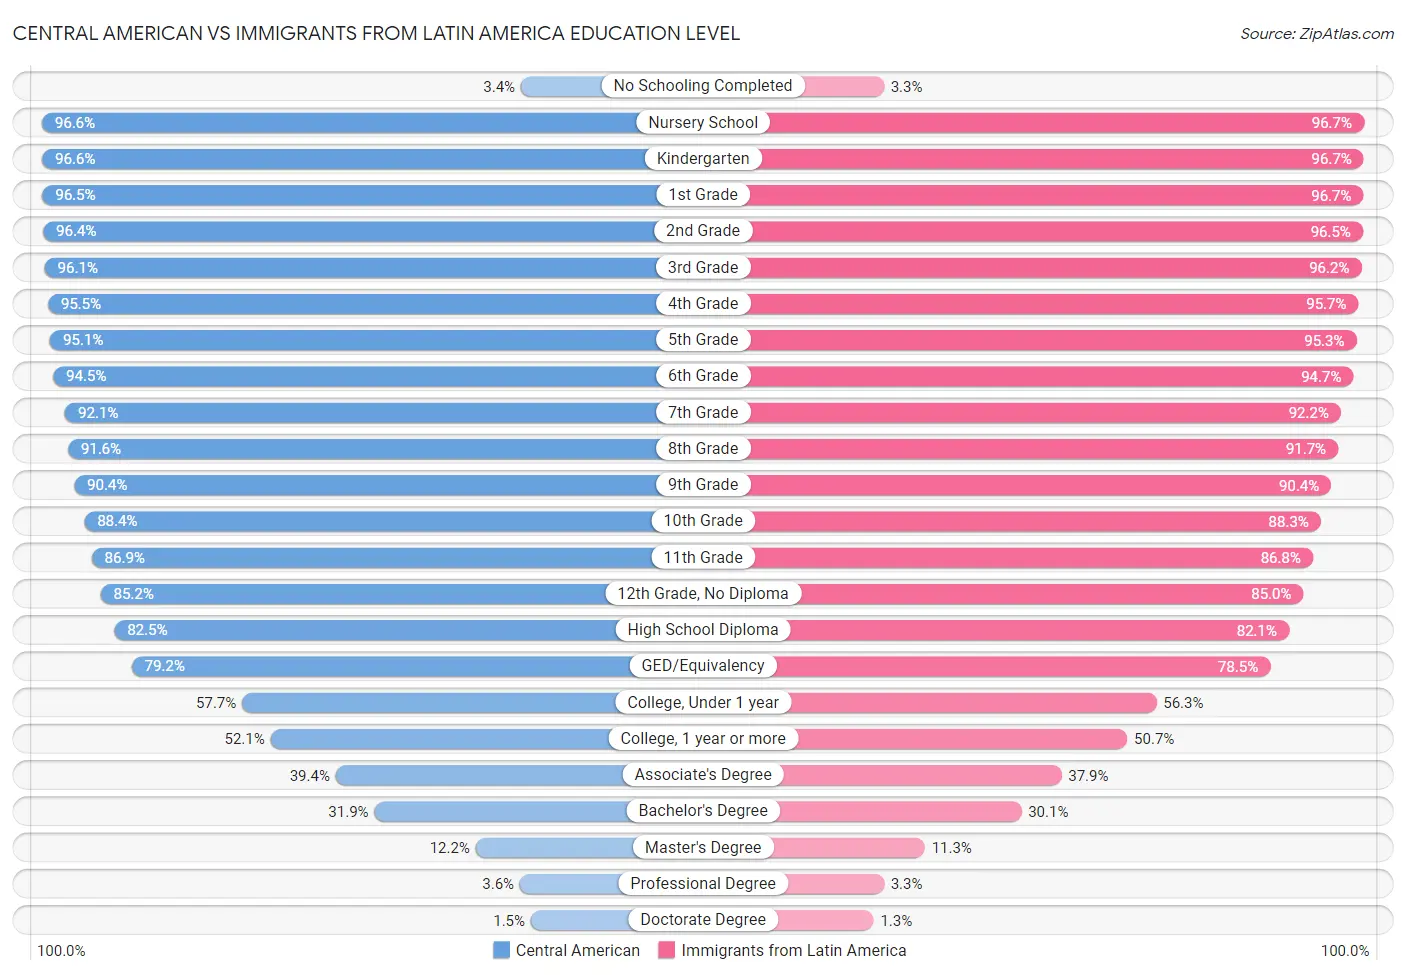 Central American vs Immigrants from Latin America Education Level